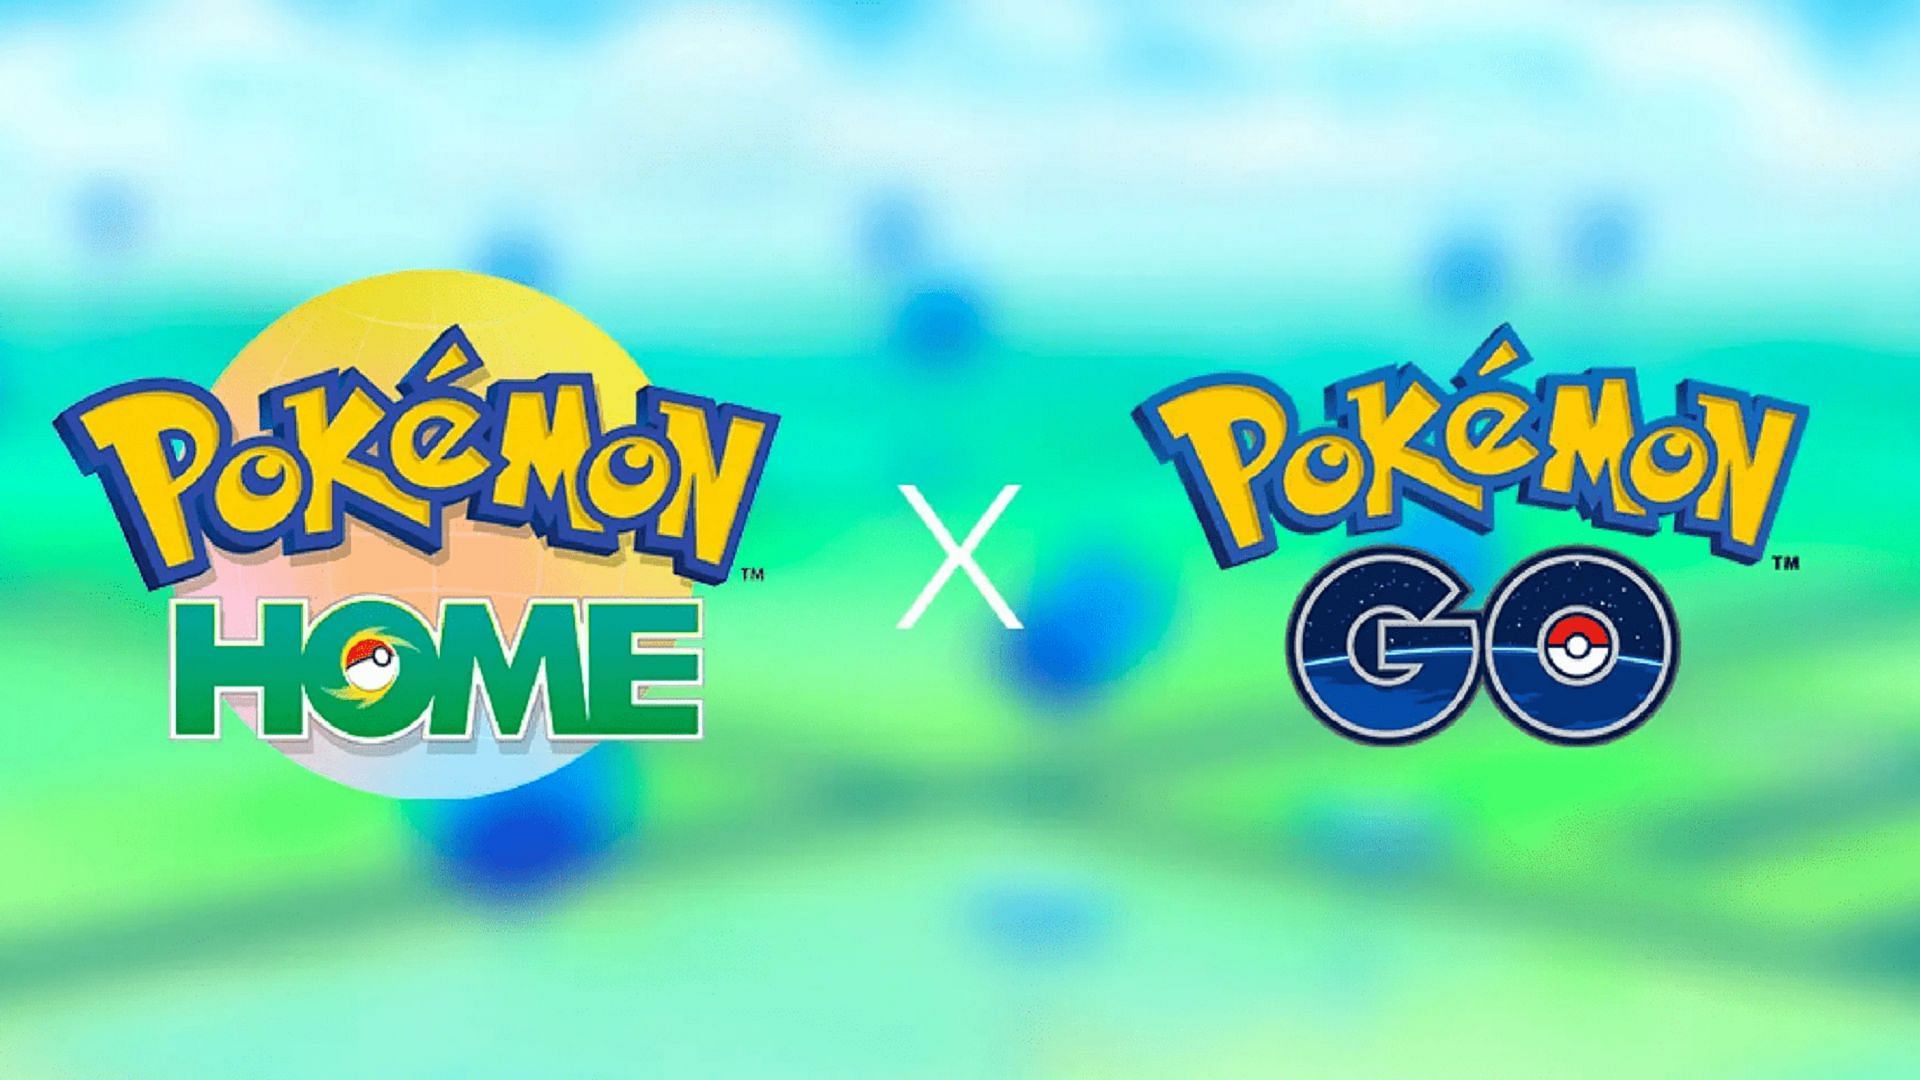 Pokemon HOME has compatibility with Pokemon GO and many other franchise titles (Image via Niantic/The Pokemon Company)